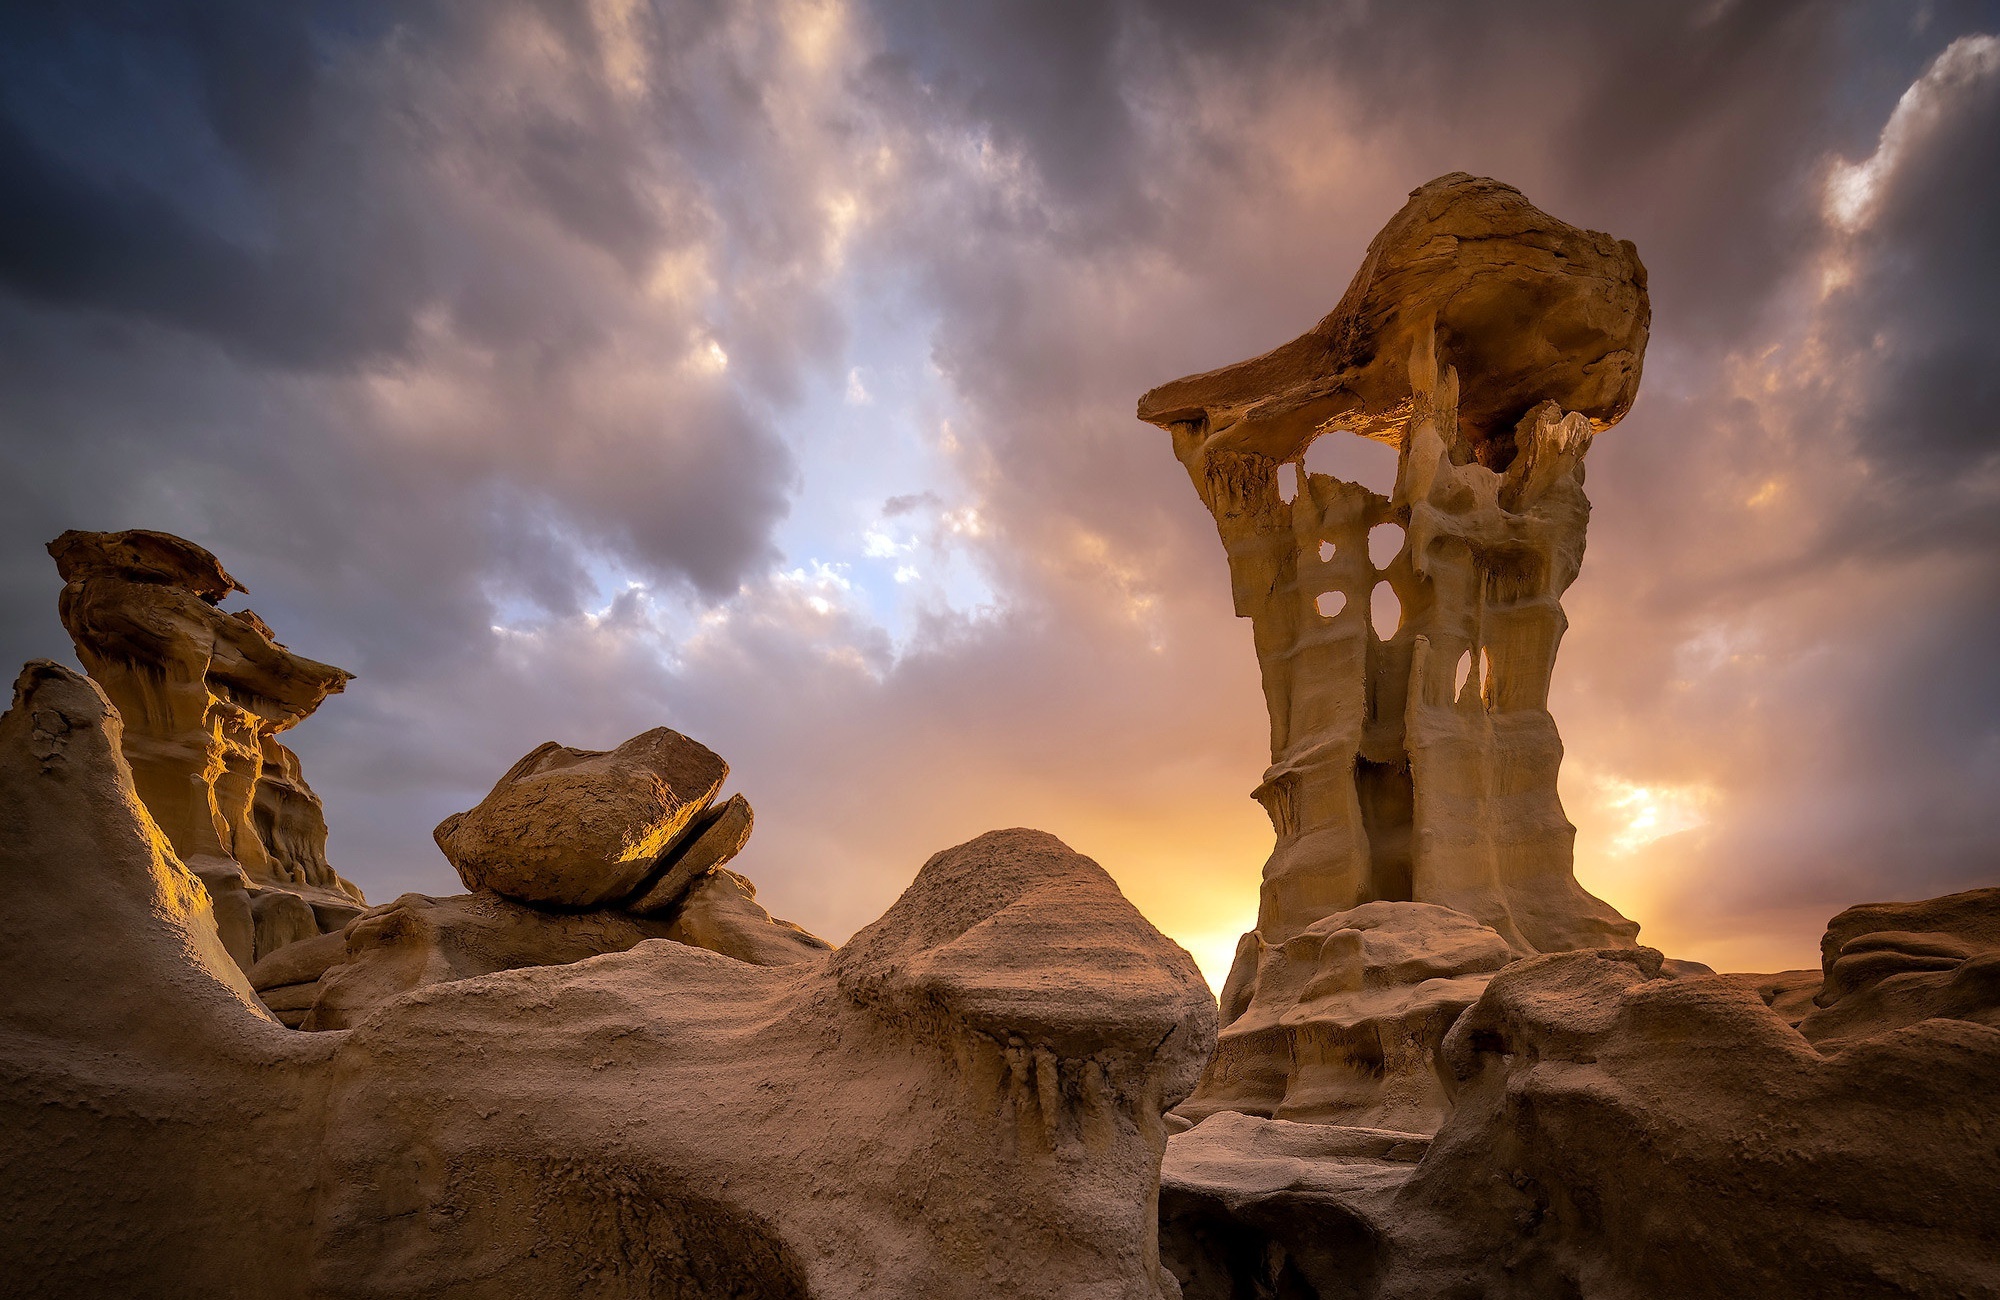 Chaco altar in New Mexico, Peter Bhringer, HD wallpaper, Background image, 2000x1300 HD Desktop